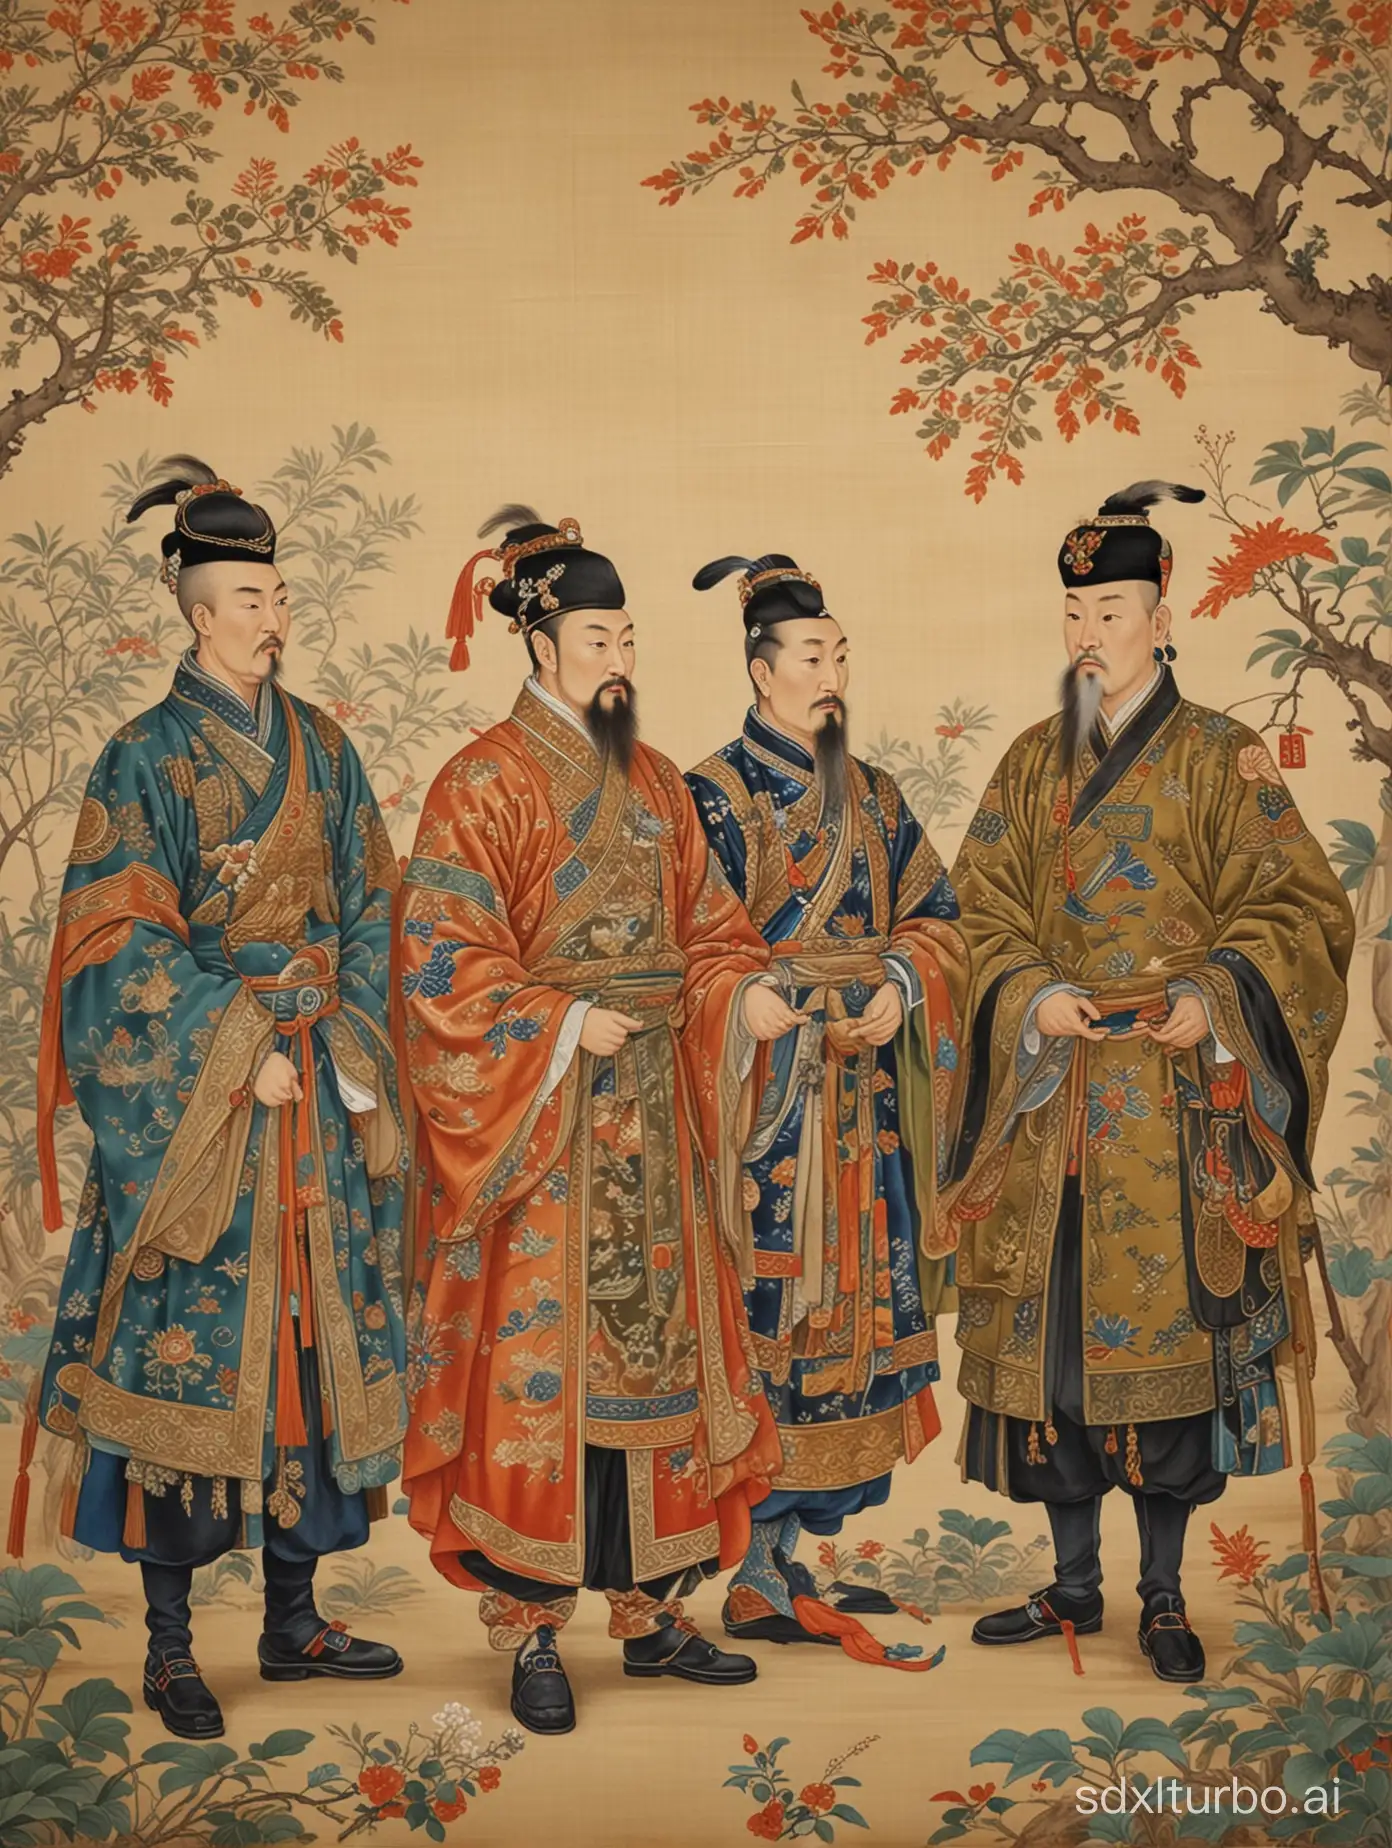 a close-up of a painting depicting five military commanders and a lad,and a cornucopia,chinese mythology,oriental art style,ming dynasty painting,oriental art style,brocade robe,